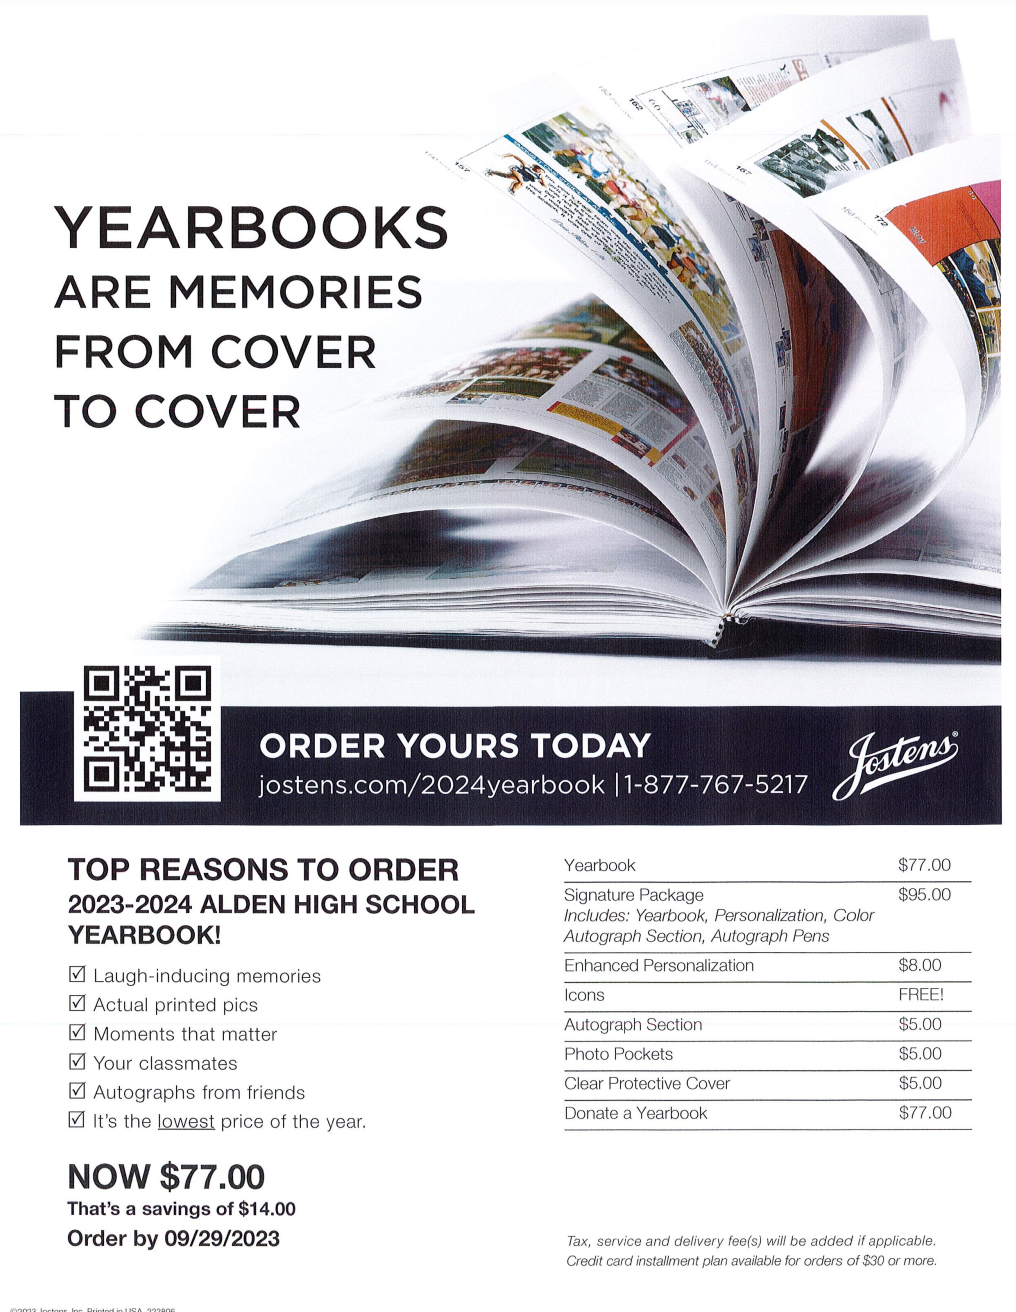 An advertisement for ordering 2023-2024 Alden High School yearbooks, featuring an image of an open yearbook with pages flipping and details on pricing and ordering information